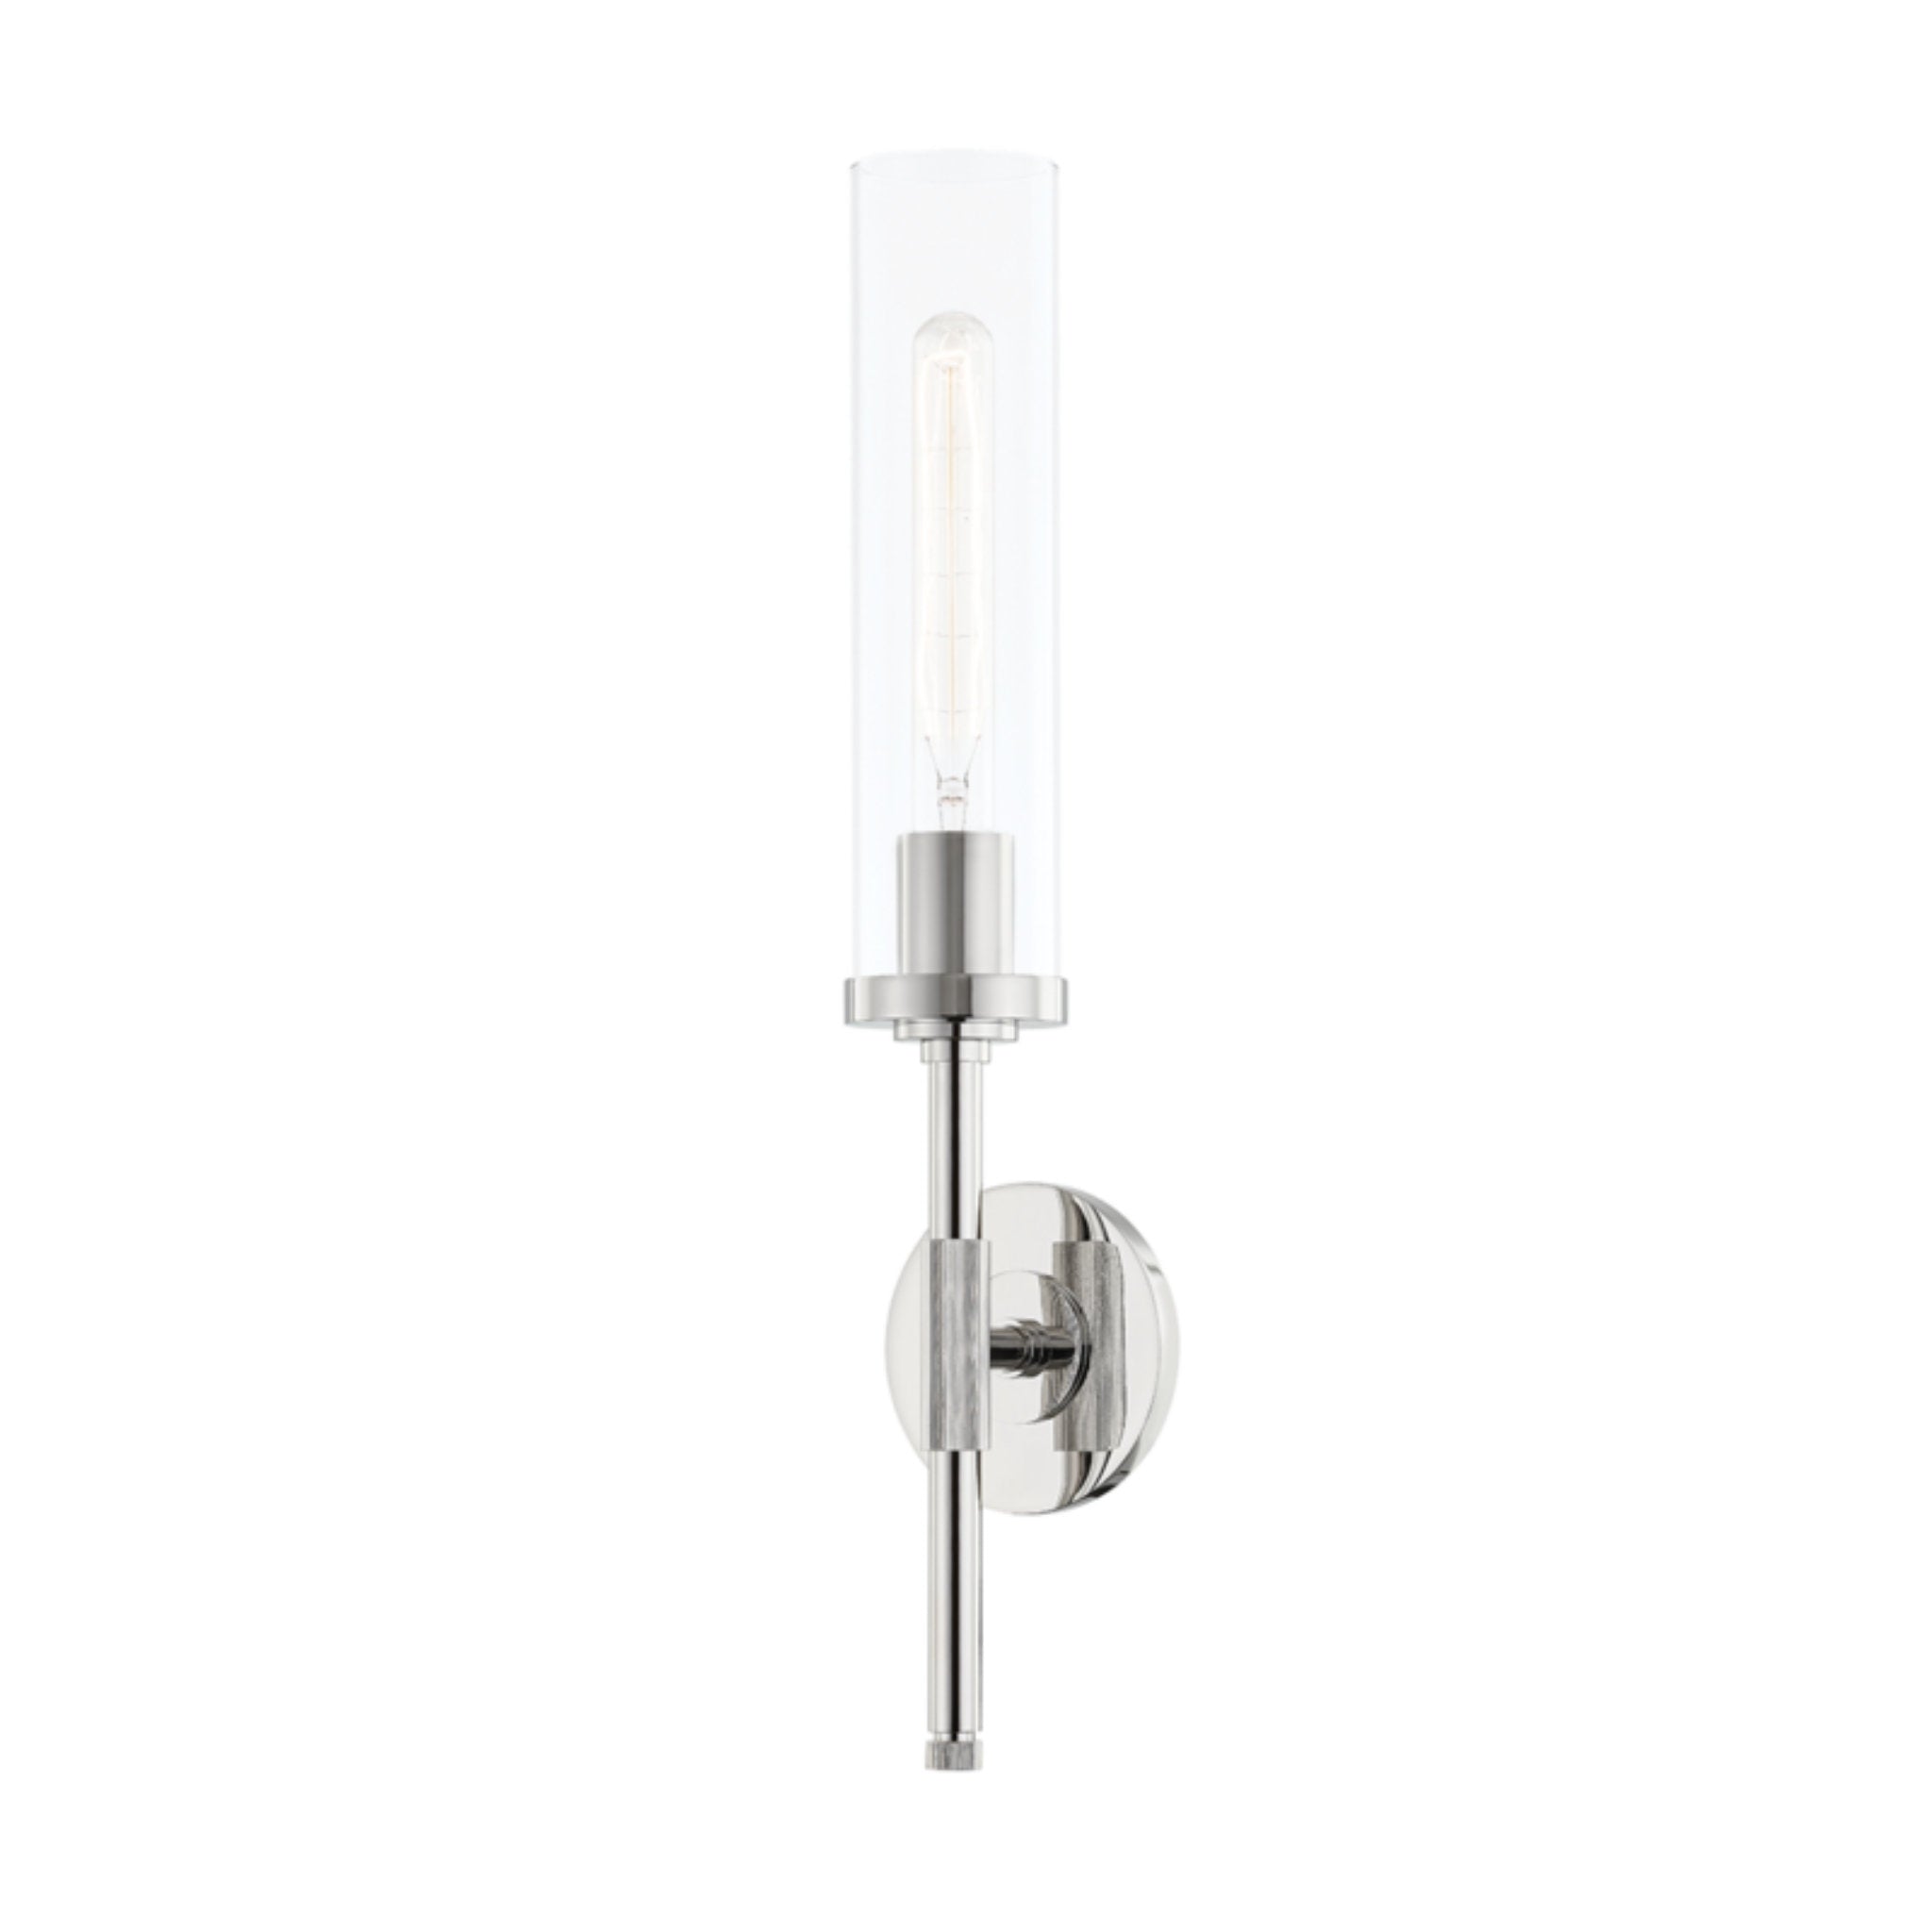 Bowery 1 Light Wall Sconce in Polished Nickel